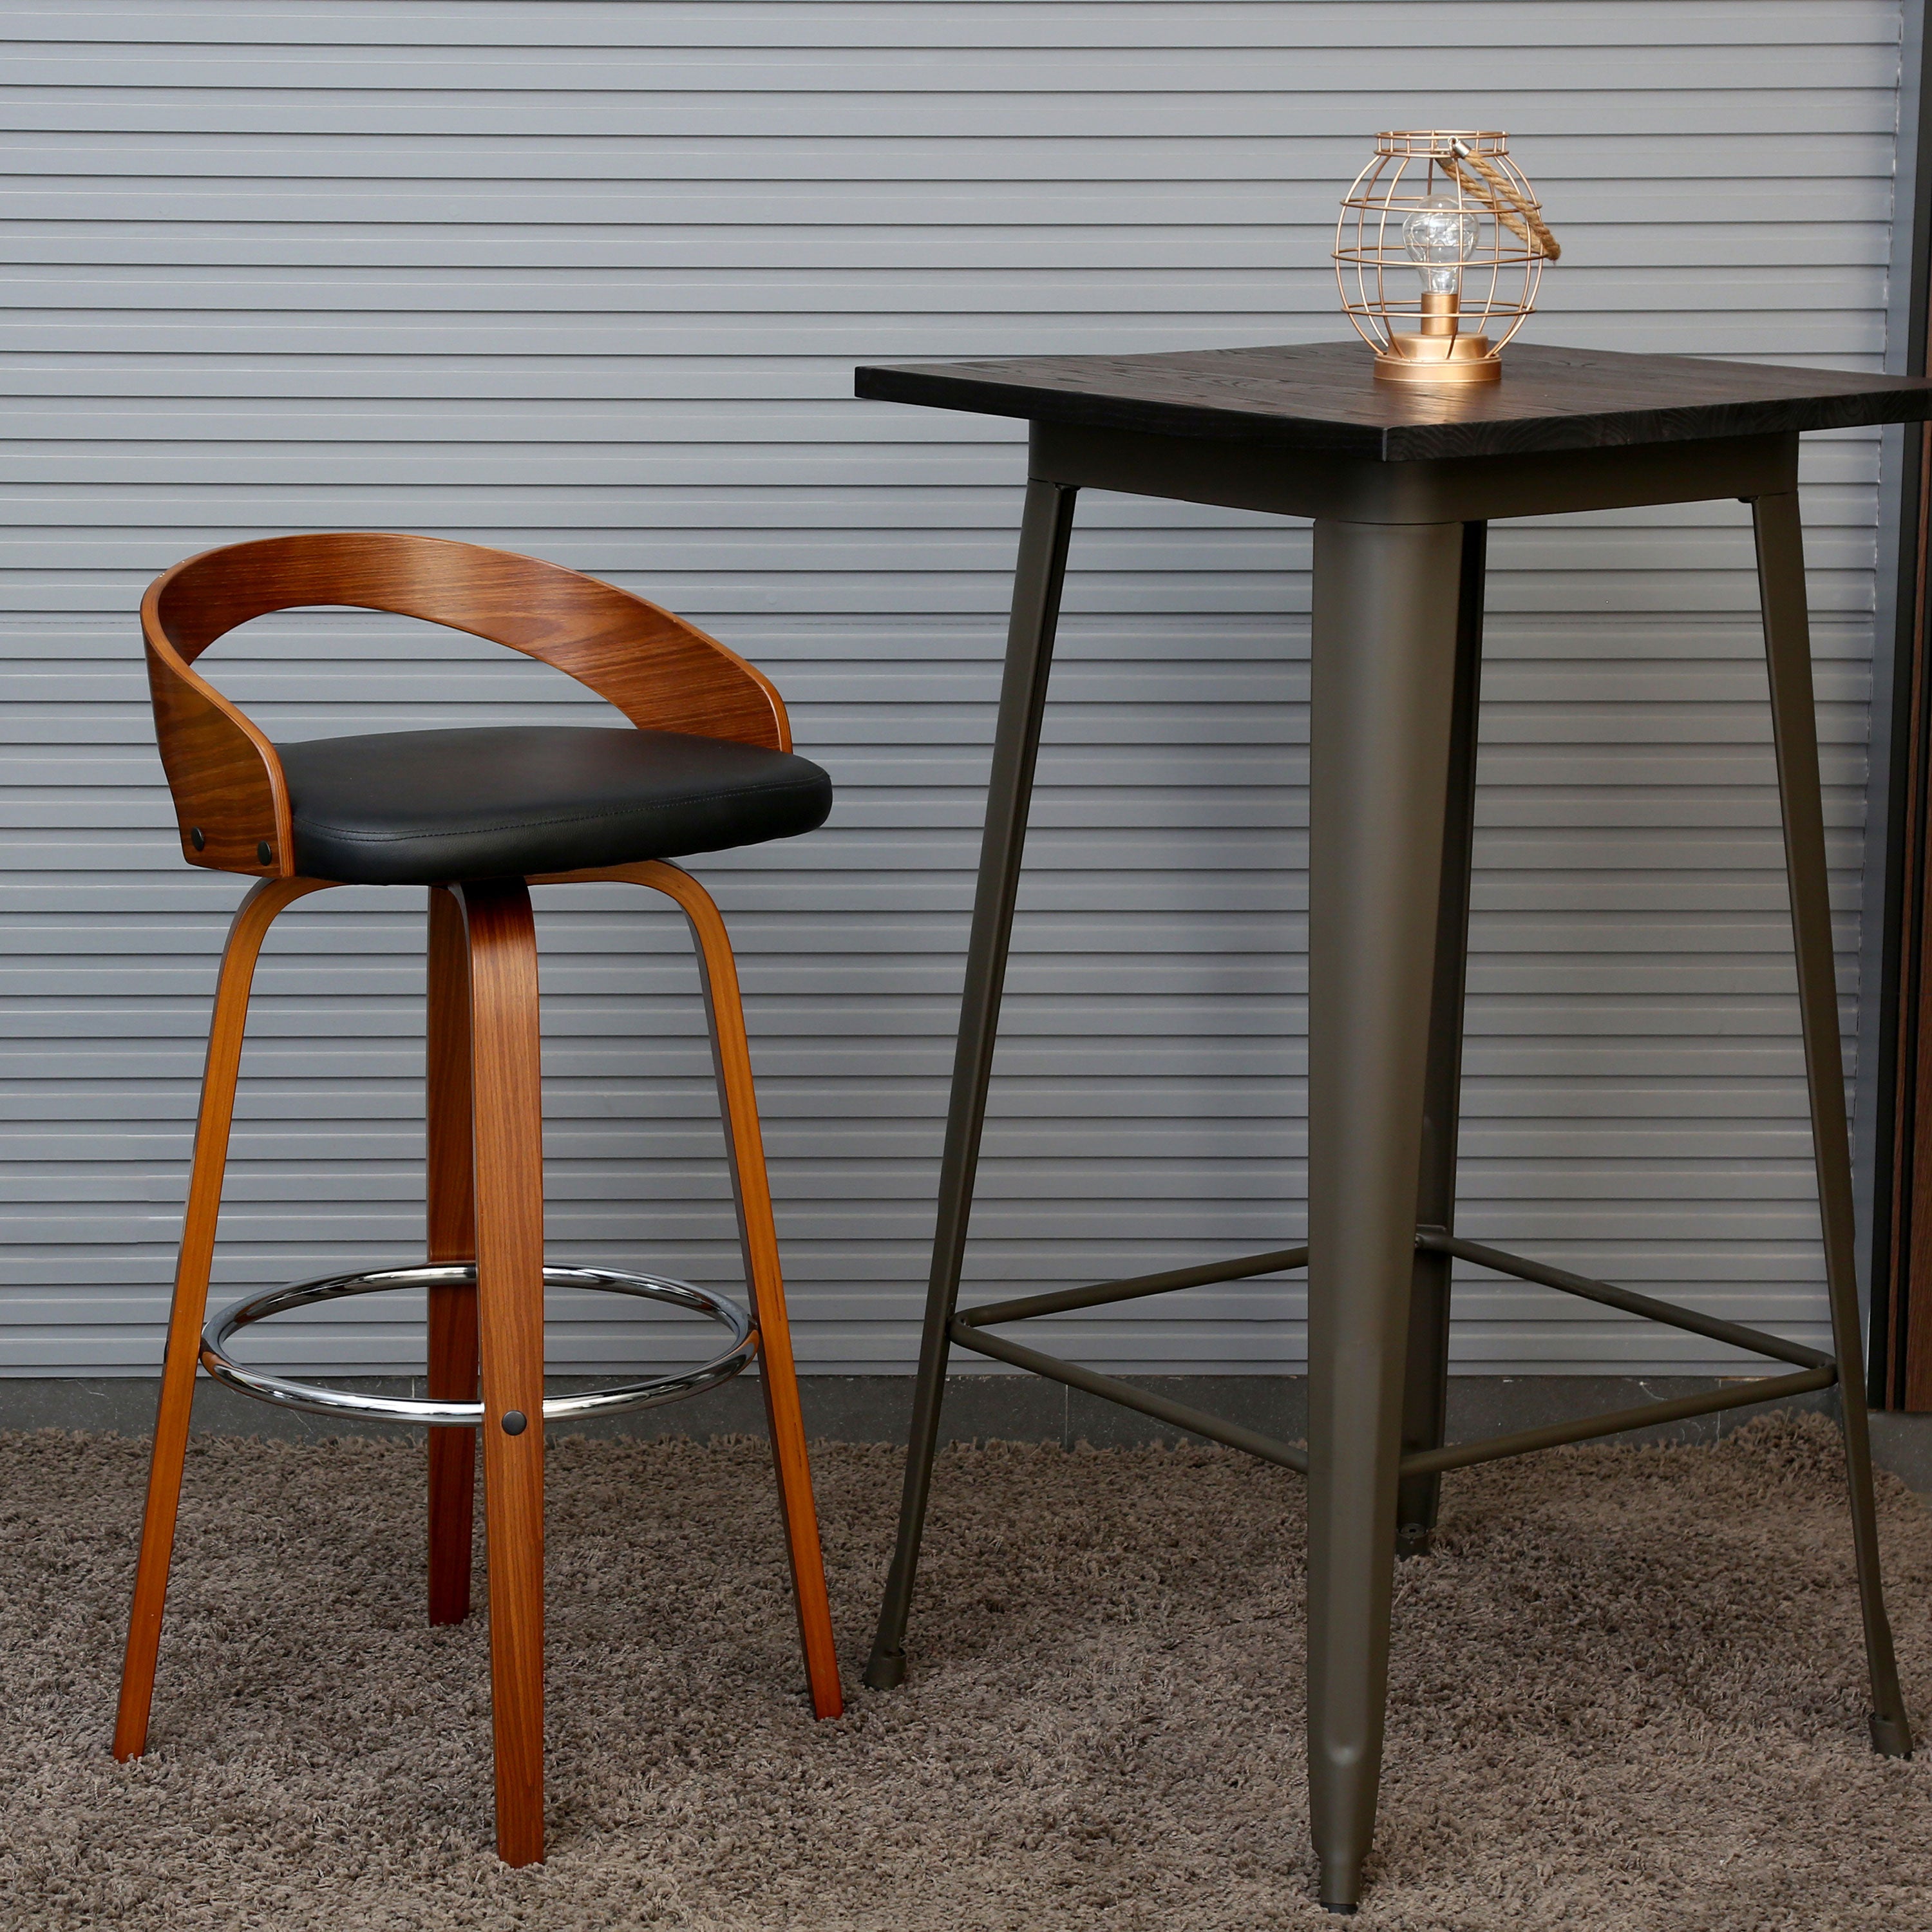 Teo Barstool With Unique Wooden Backrest, Leg And Leather Seat.